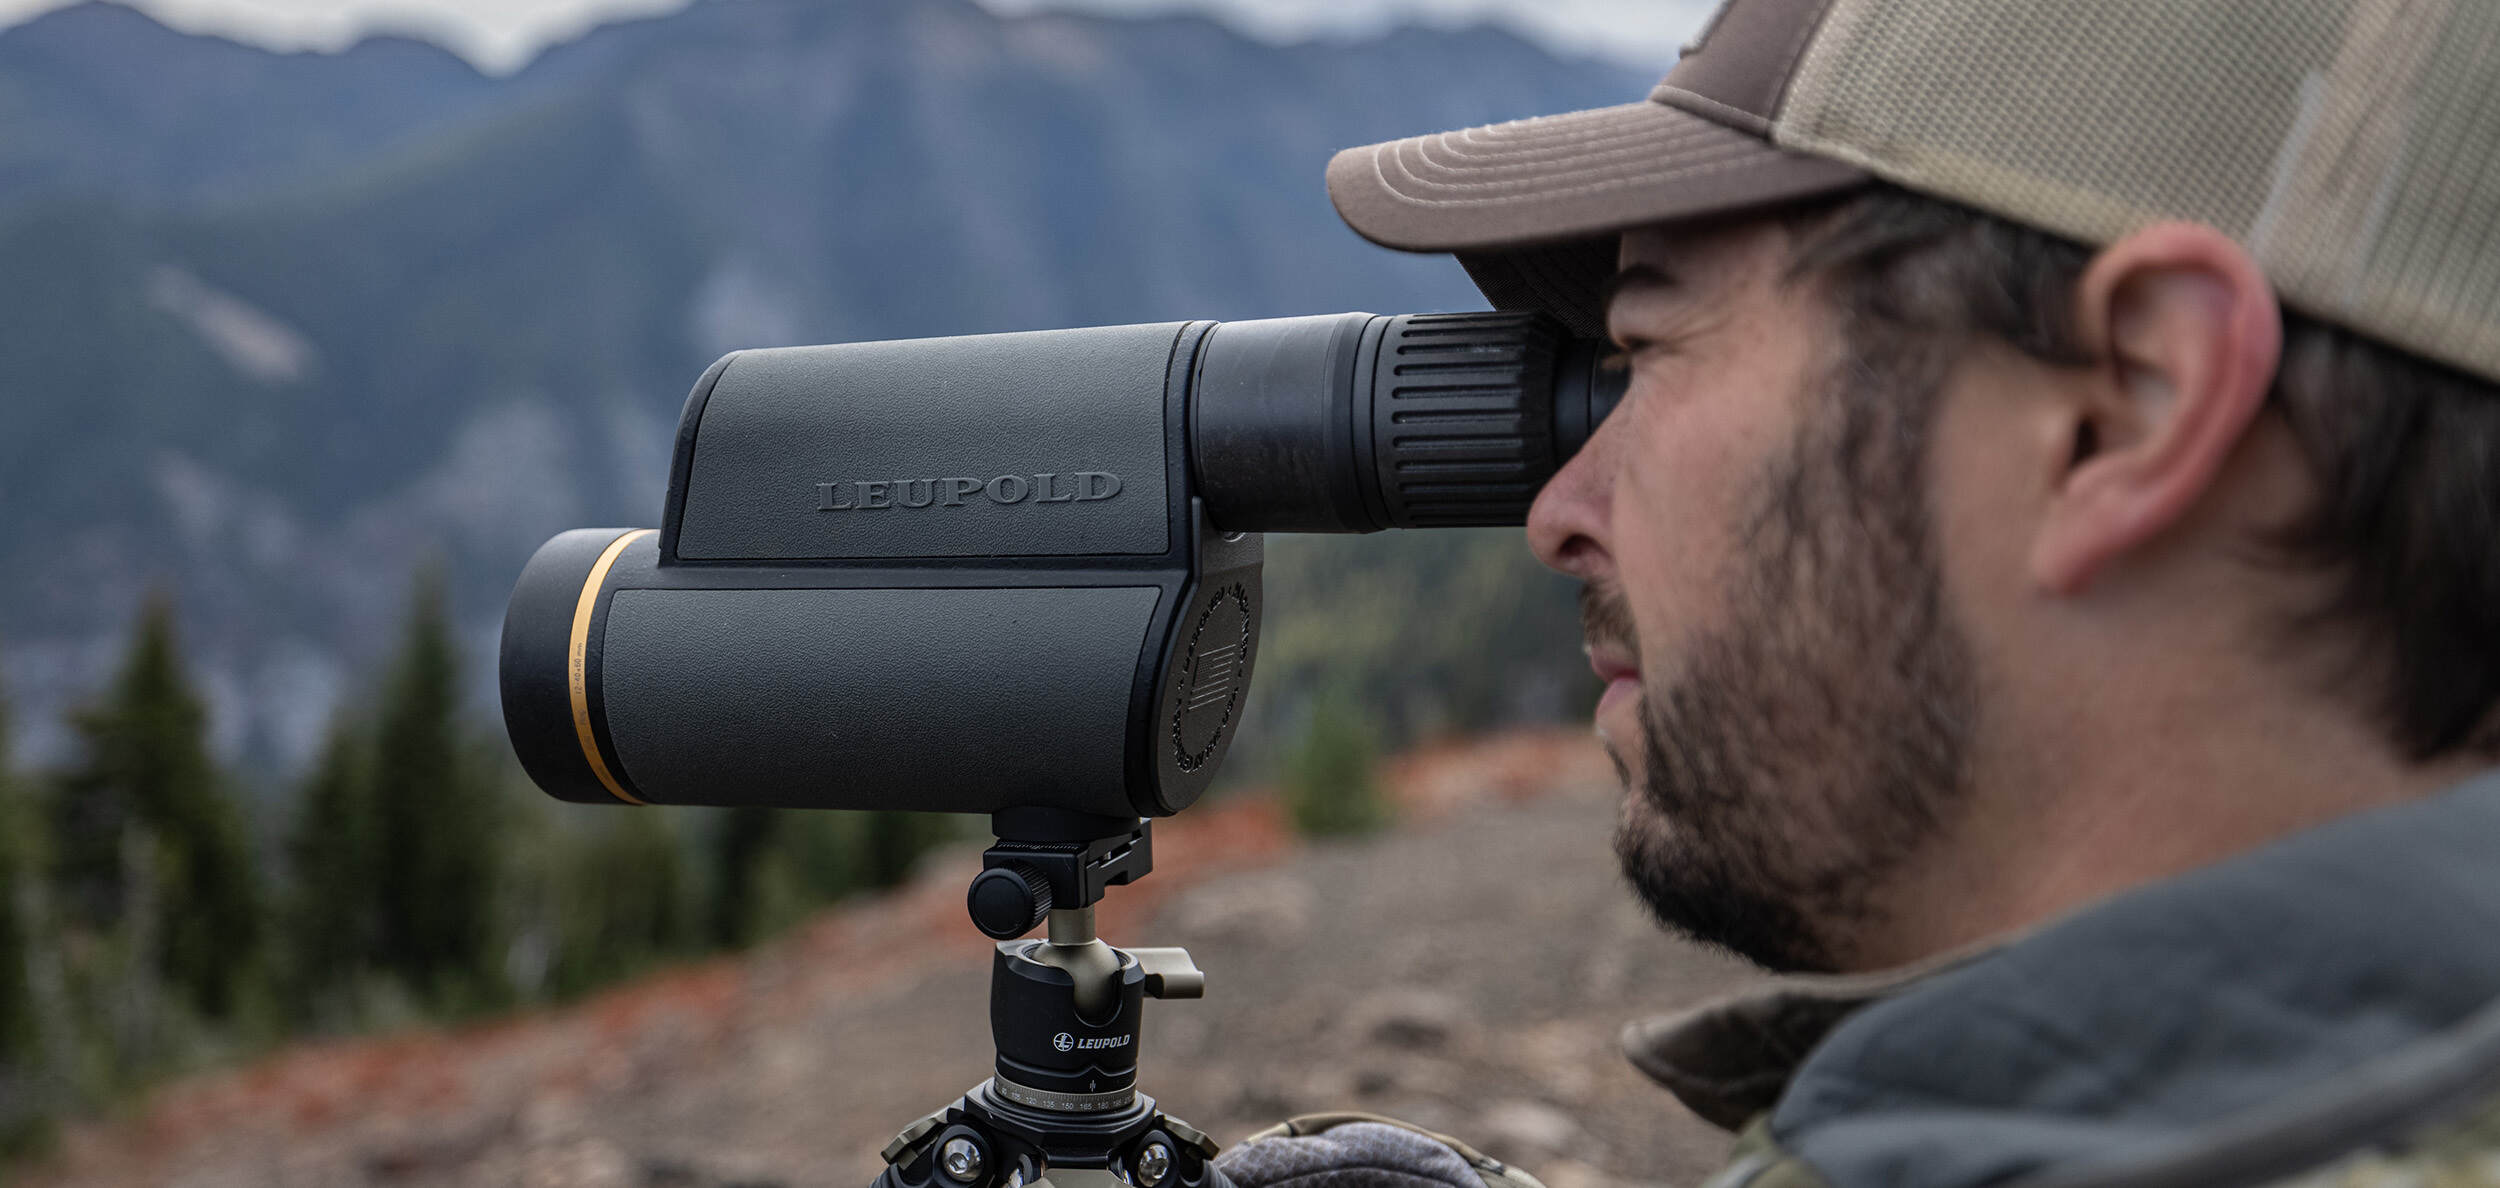 hunter wearing camouflage and hat glassing with leupold spotter scope